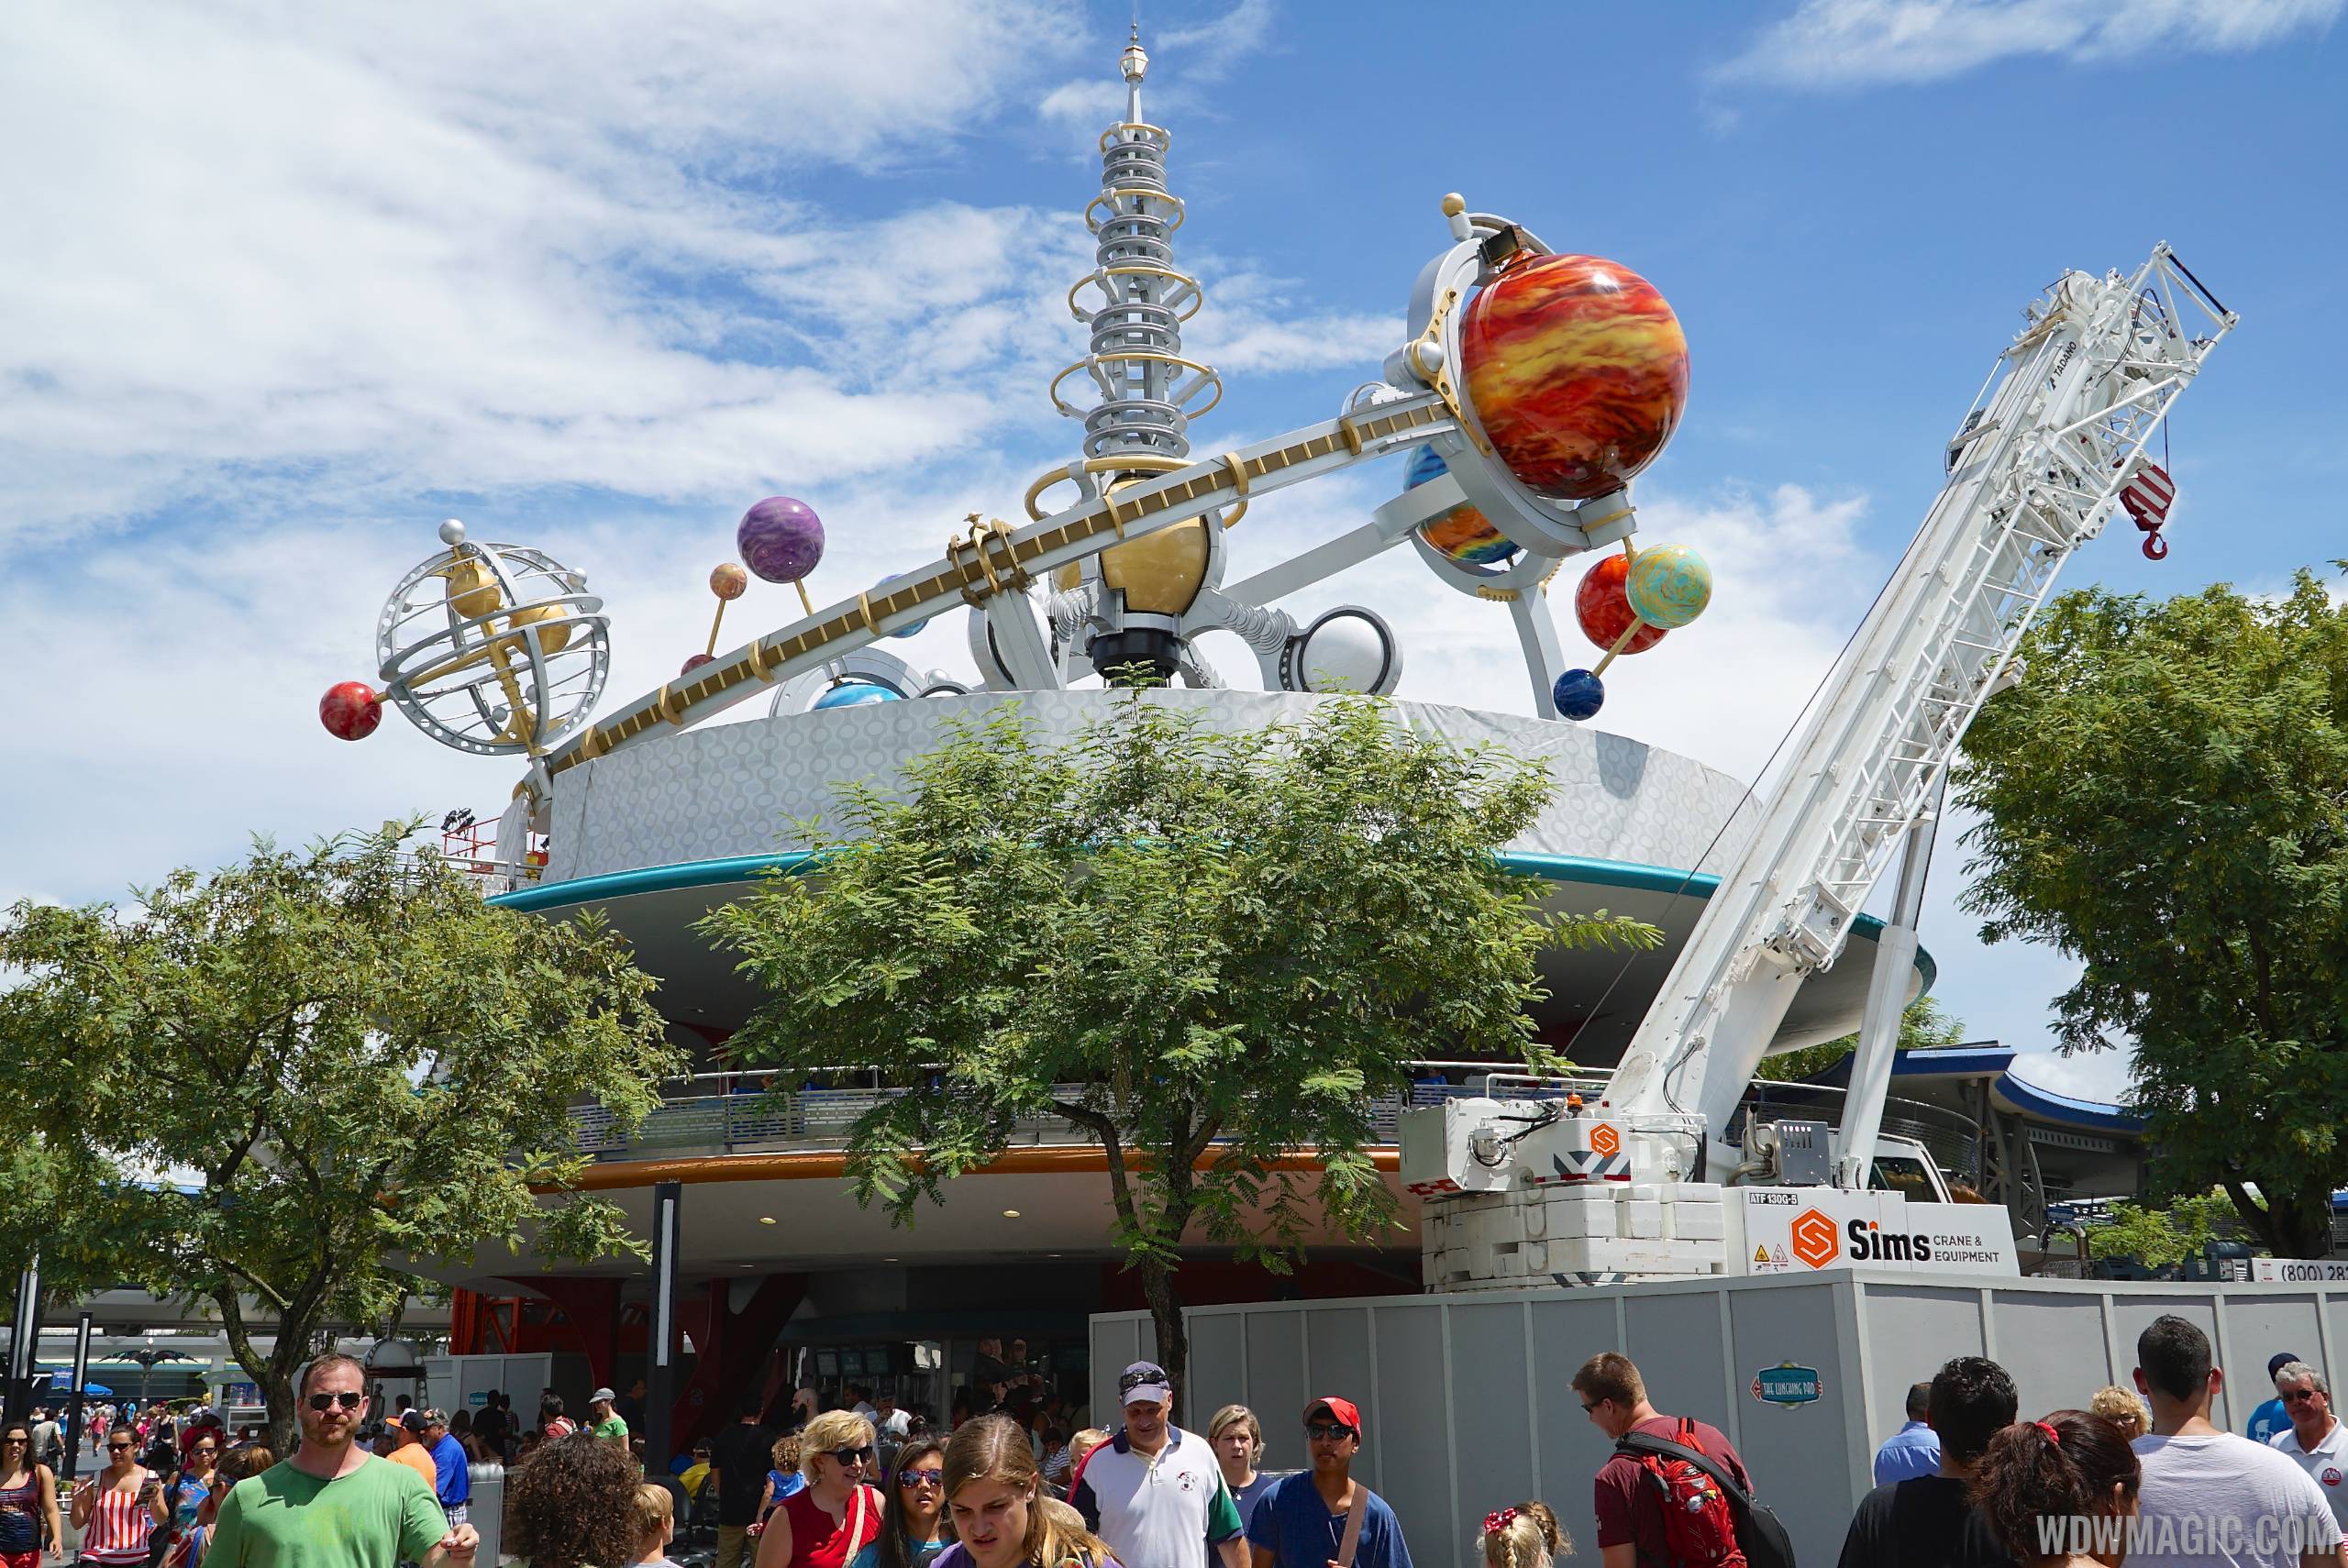 Planets are back at the Astro Orbitor